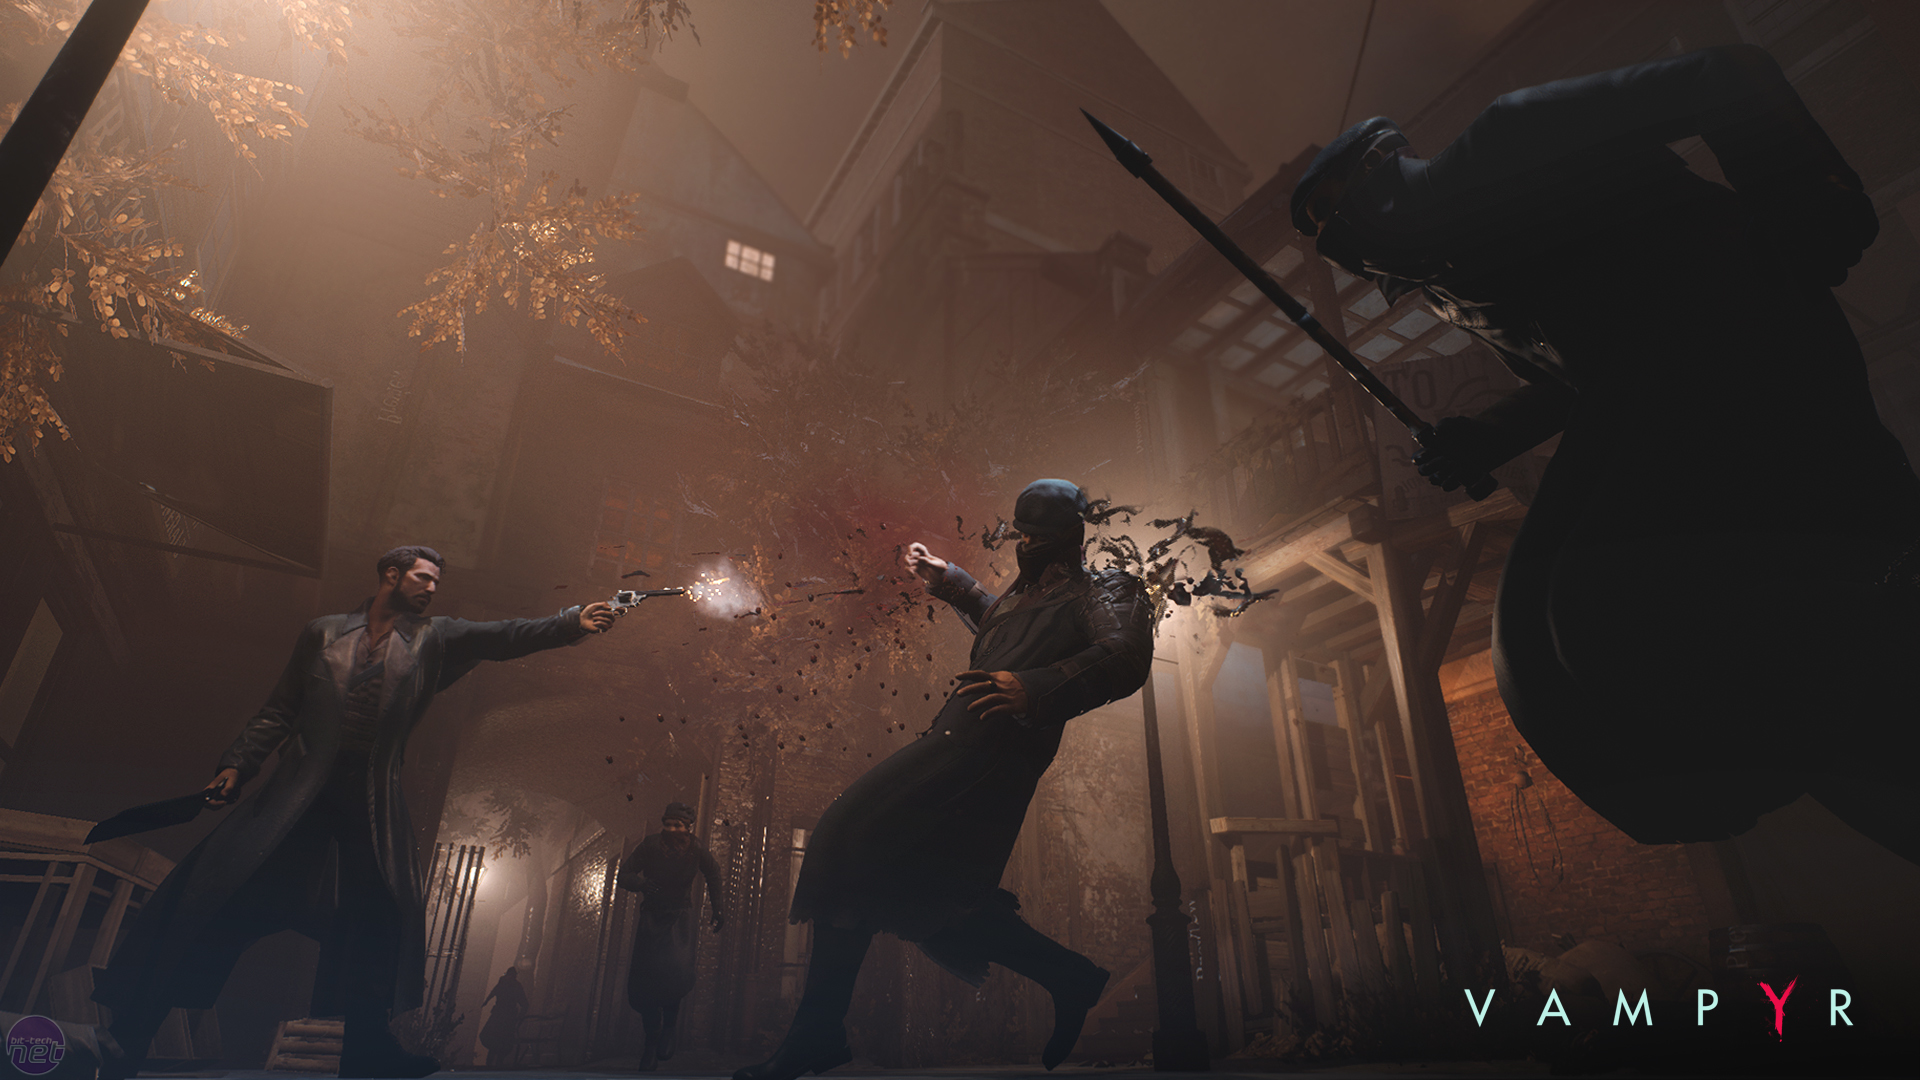 Vampyr Preview - It looks like a bloody good vampire game.